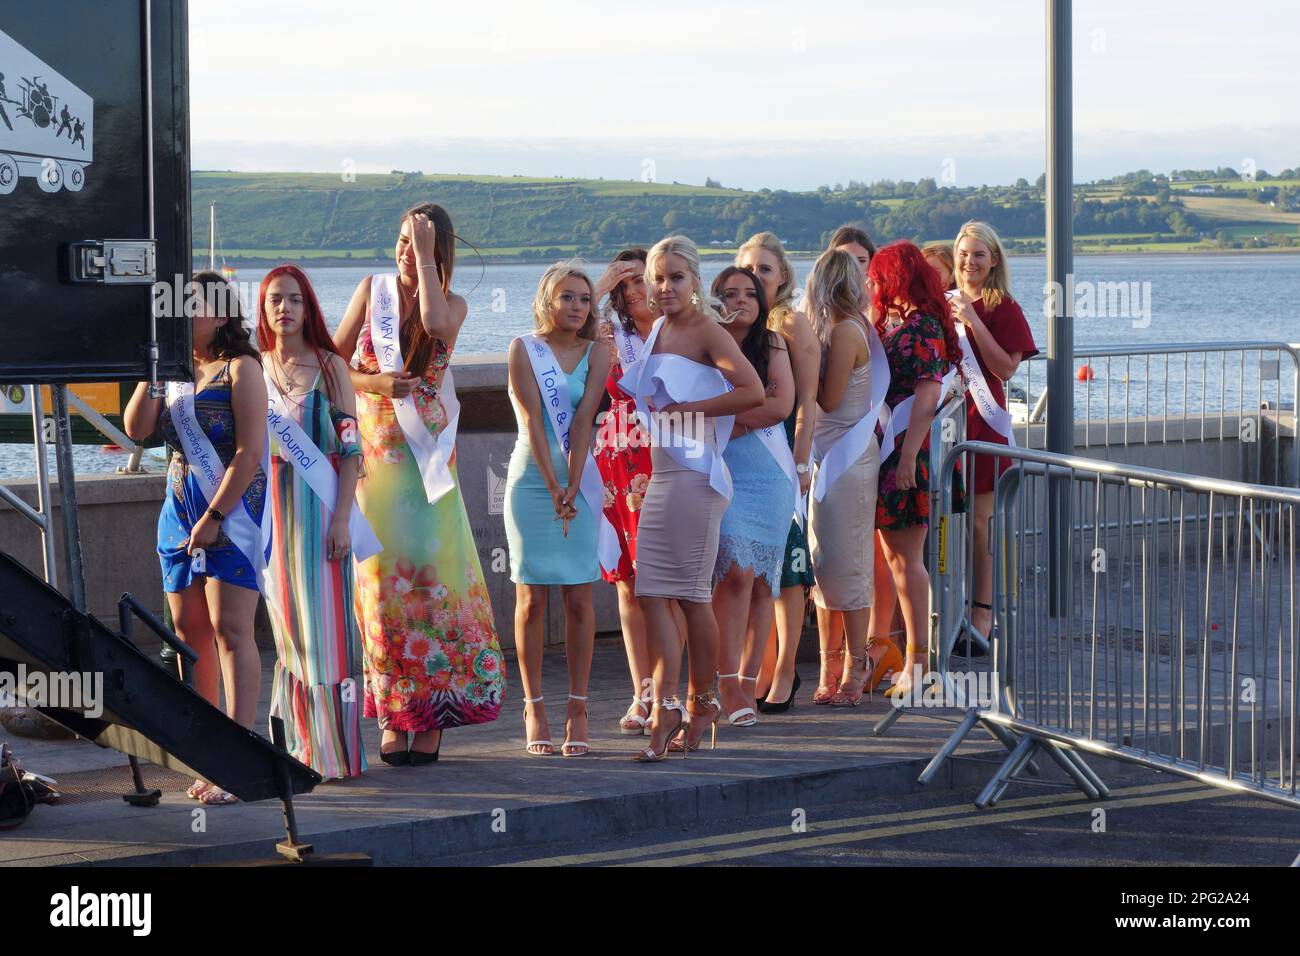 candidates for the 2019 Queen of the Sea competition in Youghal, County Cork, Ireland Stock Photo